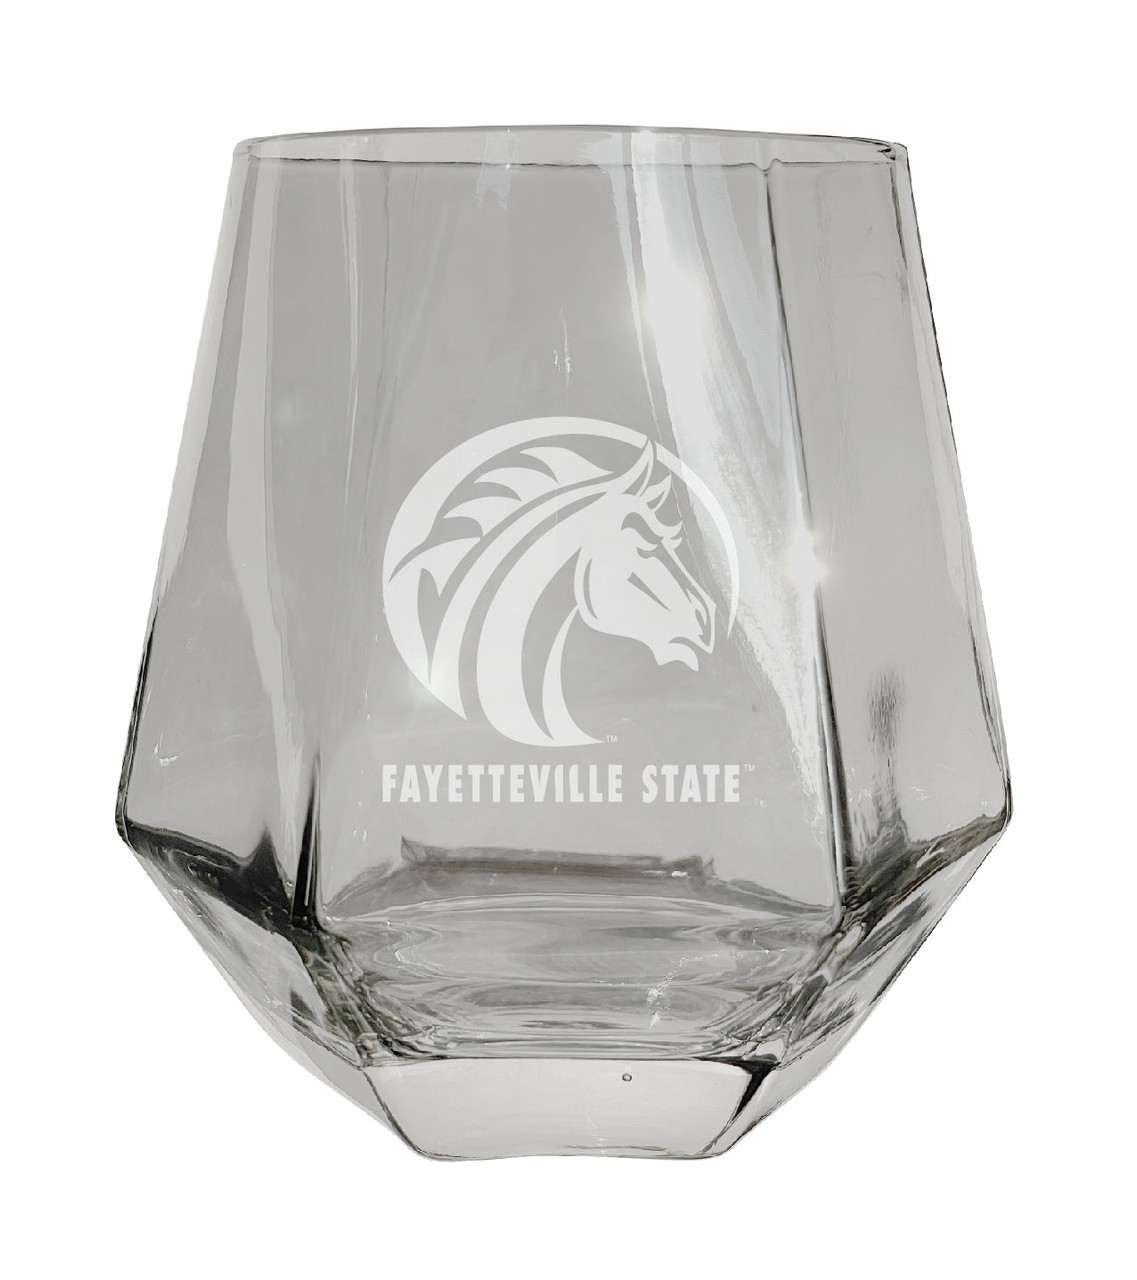 Fayetteville State University Etched Diamond Cut Stemless 10 ounce Wine Glass Clear